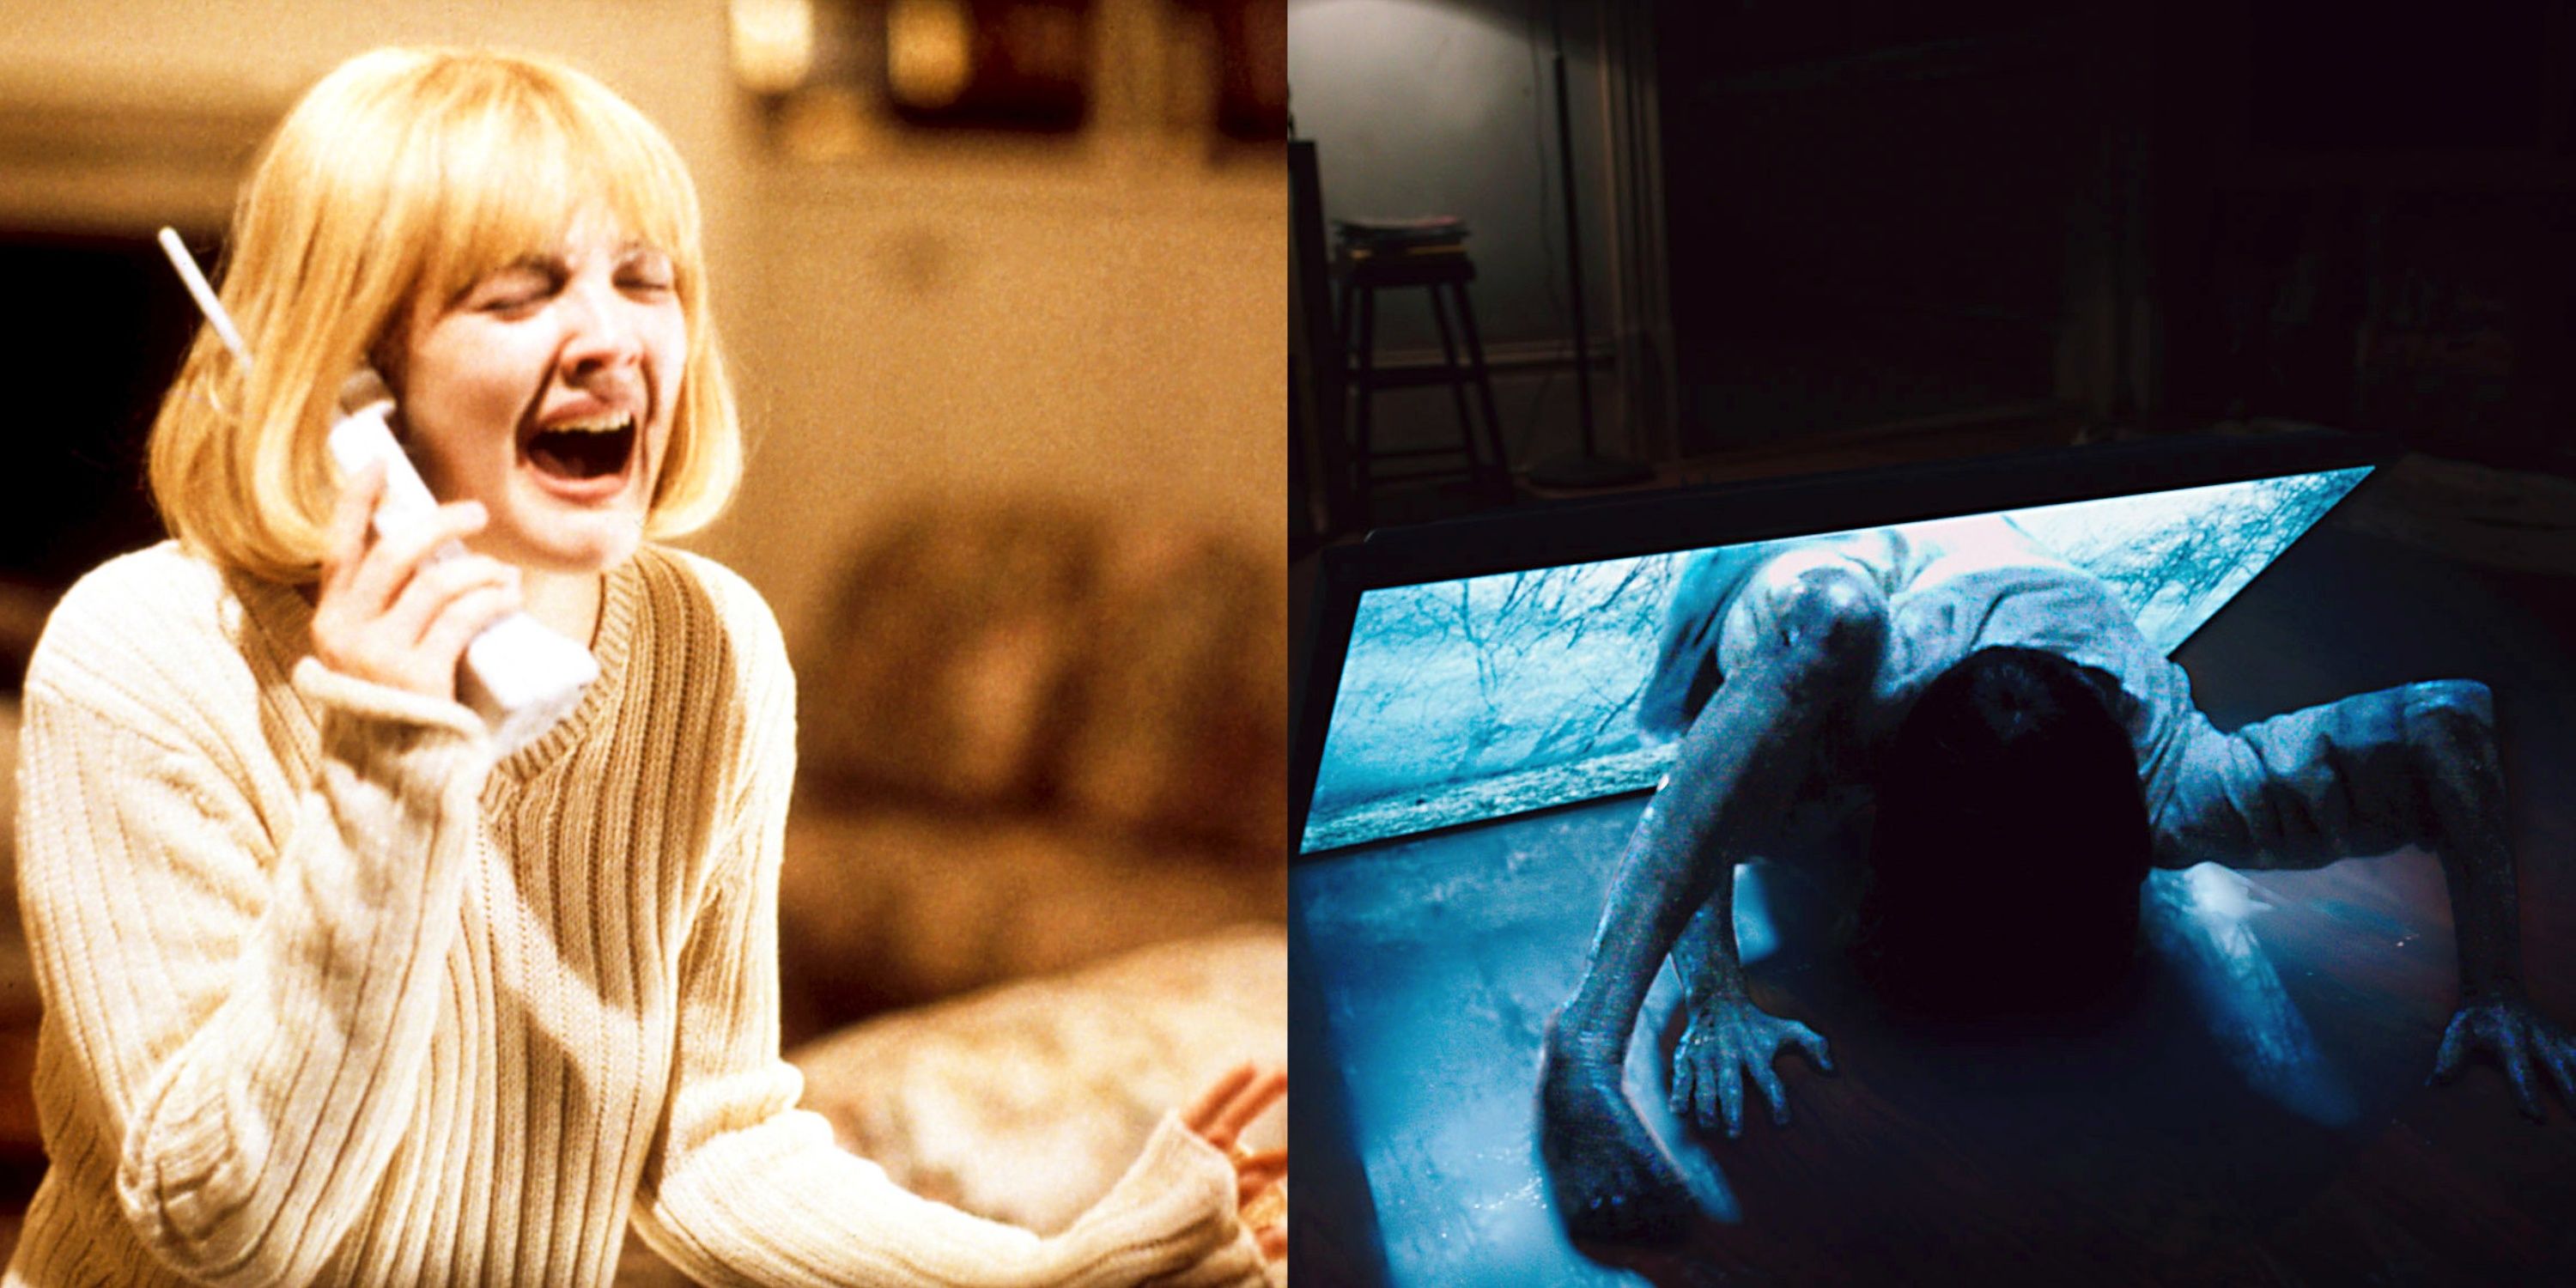 Split image of Drew Barrymore in Scream and the girl coming out of the TV in The Ring